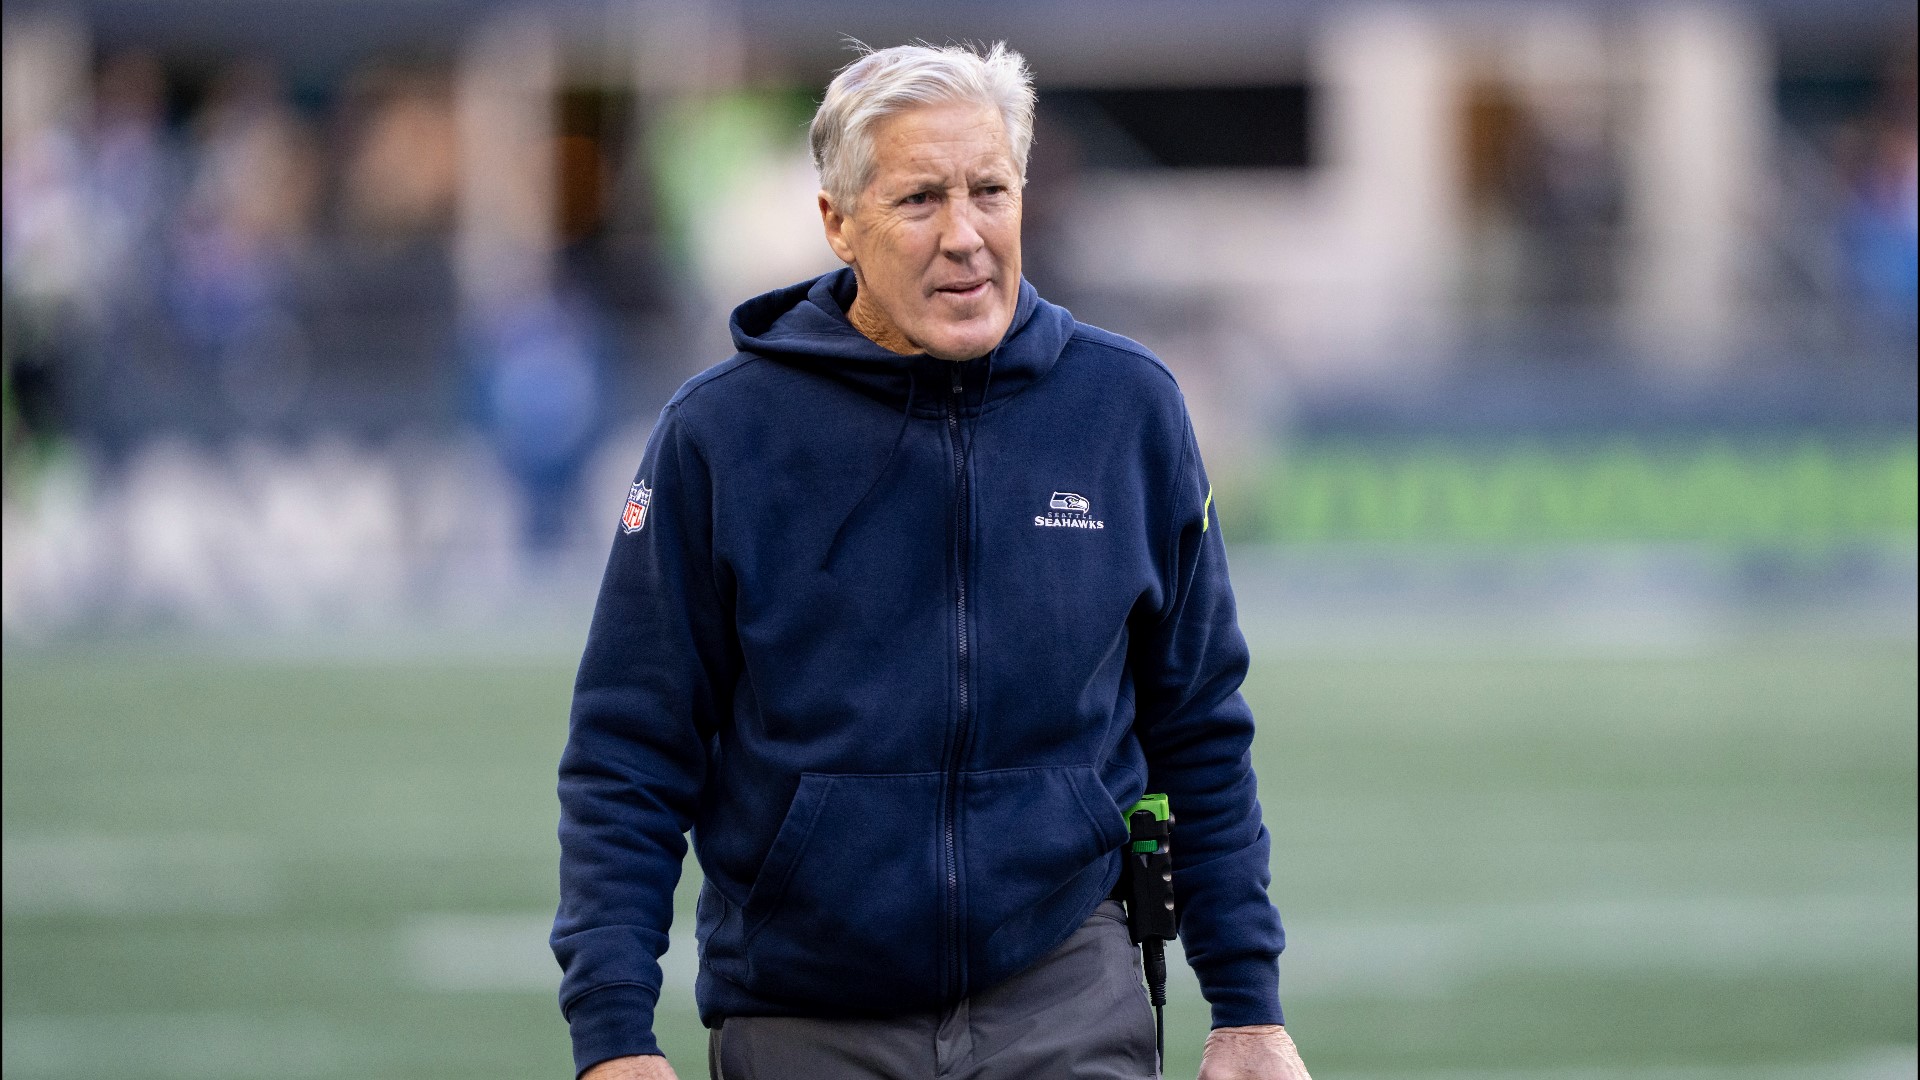 After 14 years as the winningest coach in franchise history, Pete Carroll is out as head coach of the Seattle Seahawks but will remain with the team as an advisor.